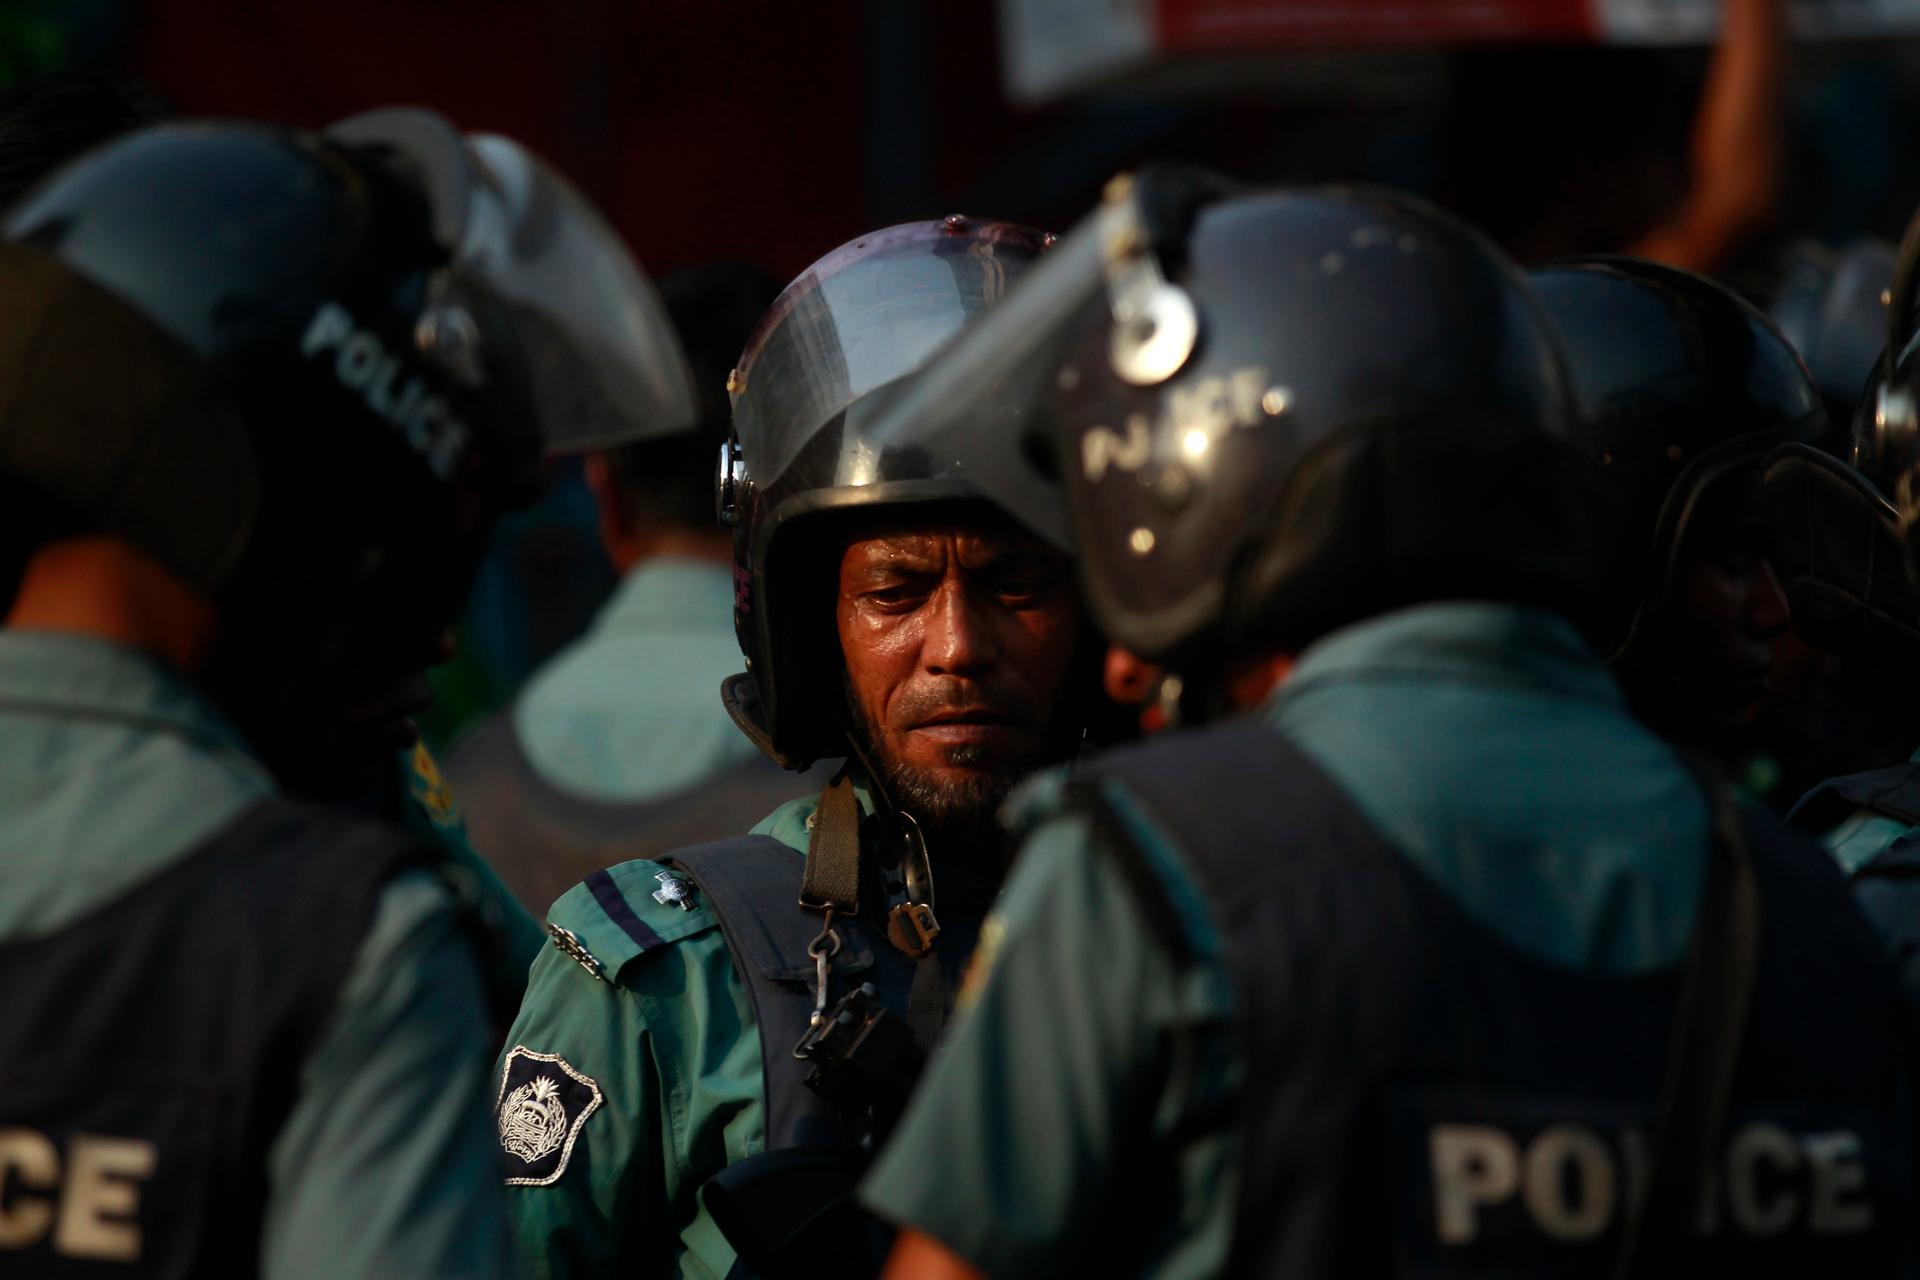 Police stand guard during a rally by activists of Hefajat-e-Islam in front of the national mosque in Dhaka on April 12, 2013.